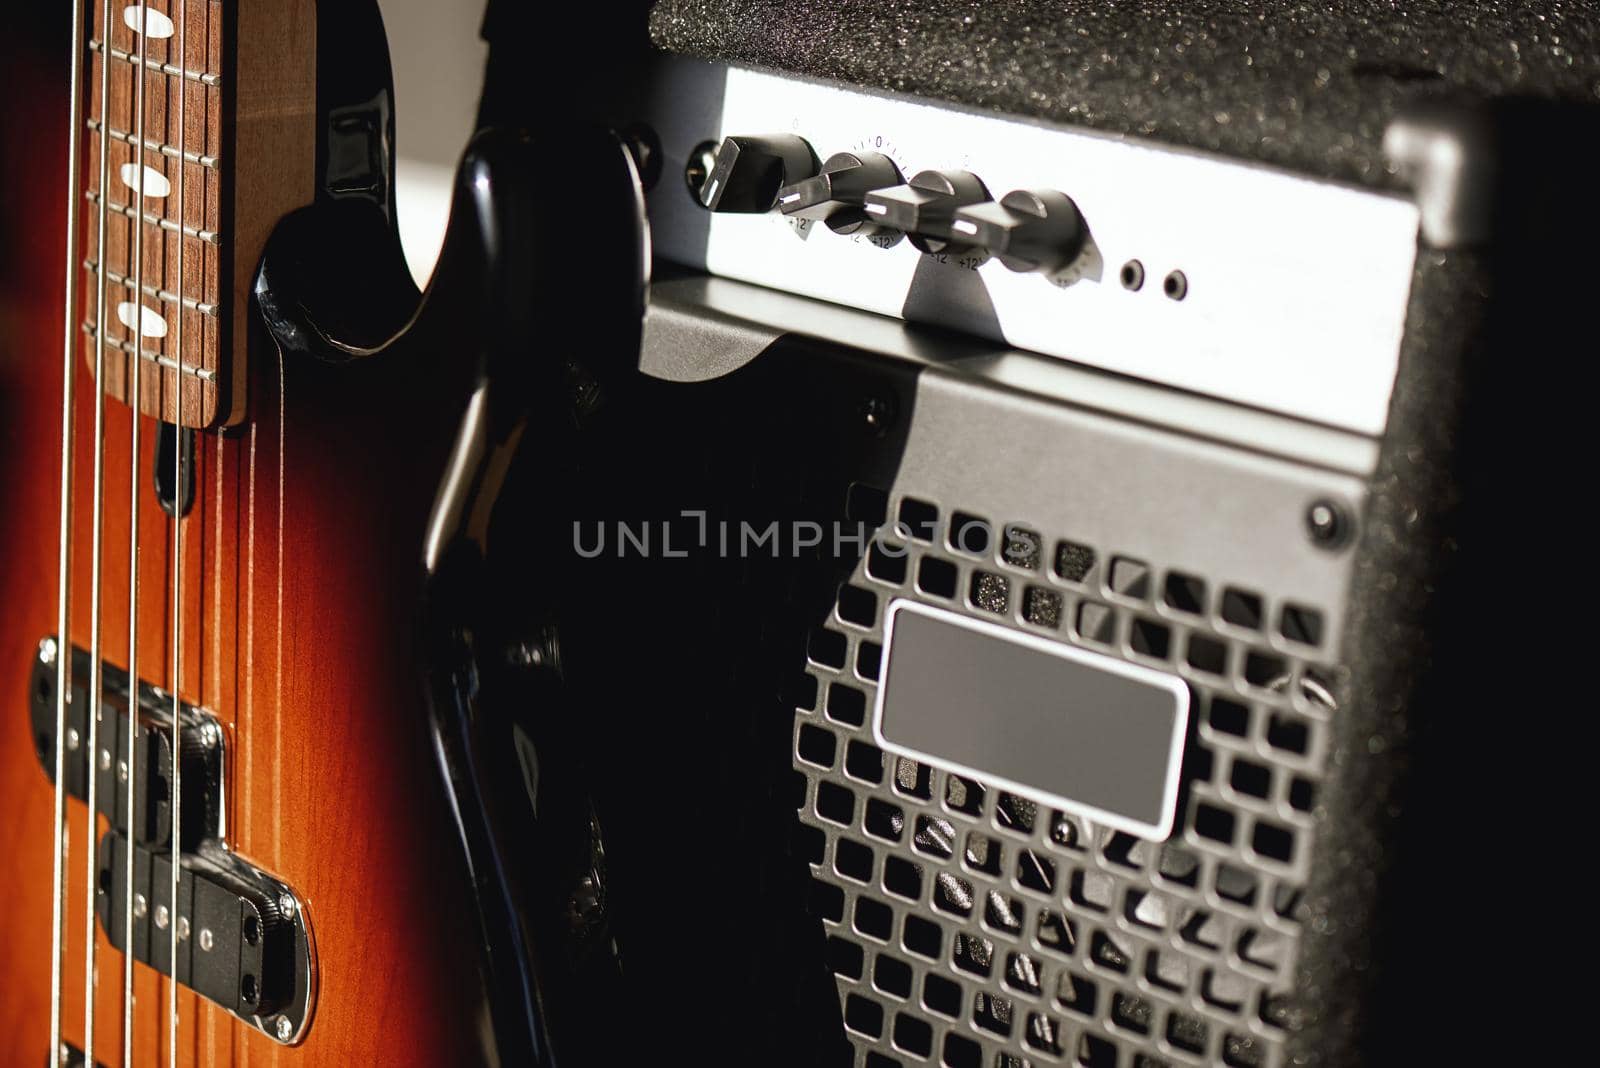 Beautiful and perfect polished electric guitar with amplifier standing in audio recording studio. Music recording. Music equipment. Musical instruments.